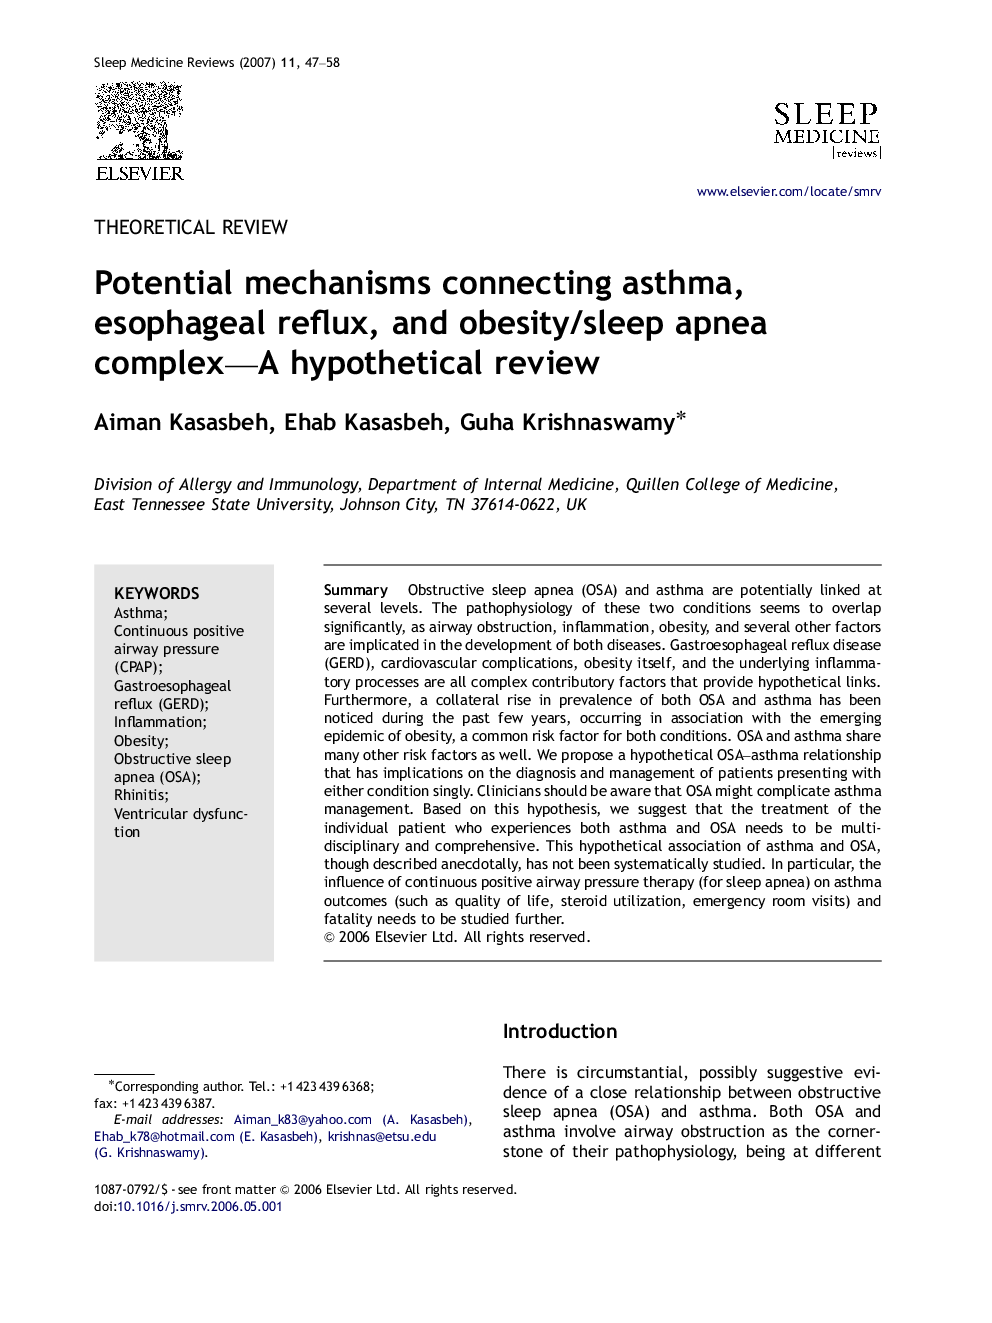 Potential mechanisms connecting asthma, esophageal reflux, and obesity/sleep apnea complex—A hypothetical review